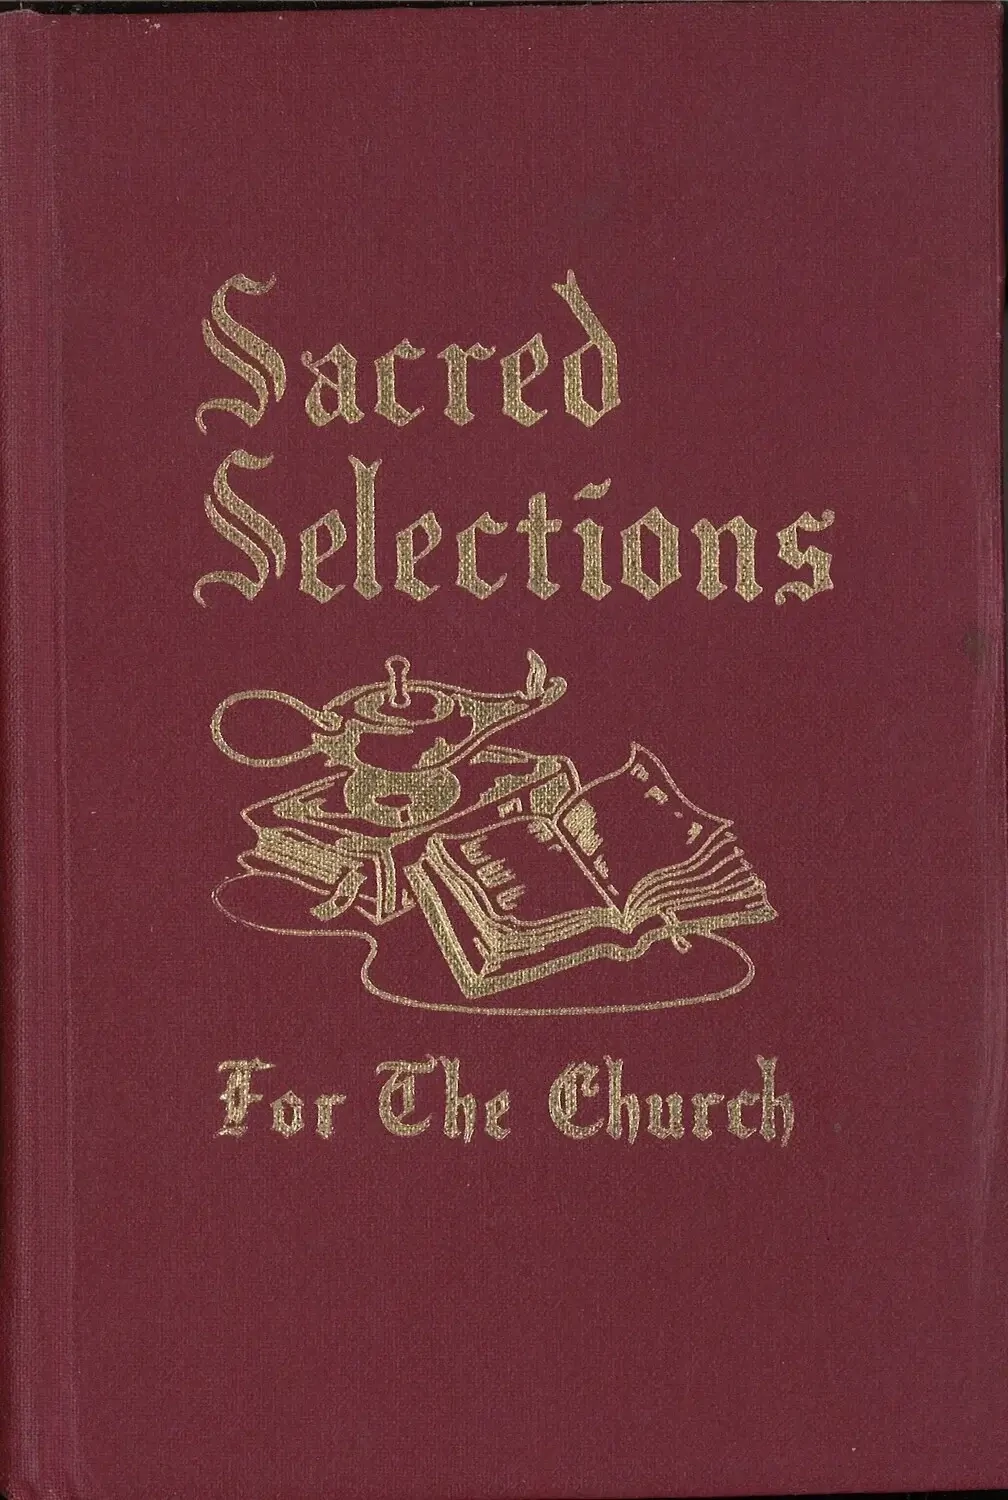 Sacred Selections For The Church by Ellis J. Crum